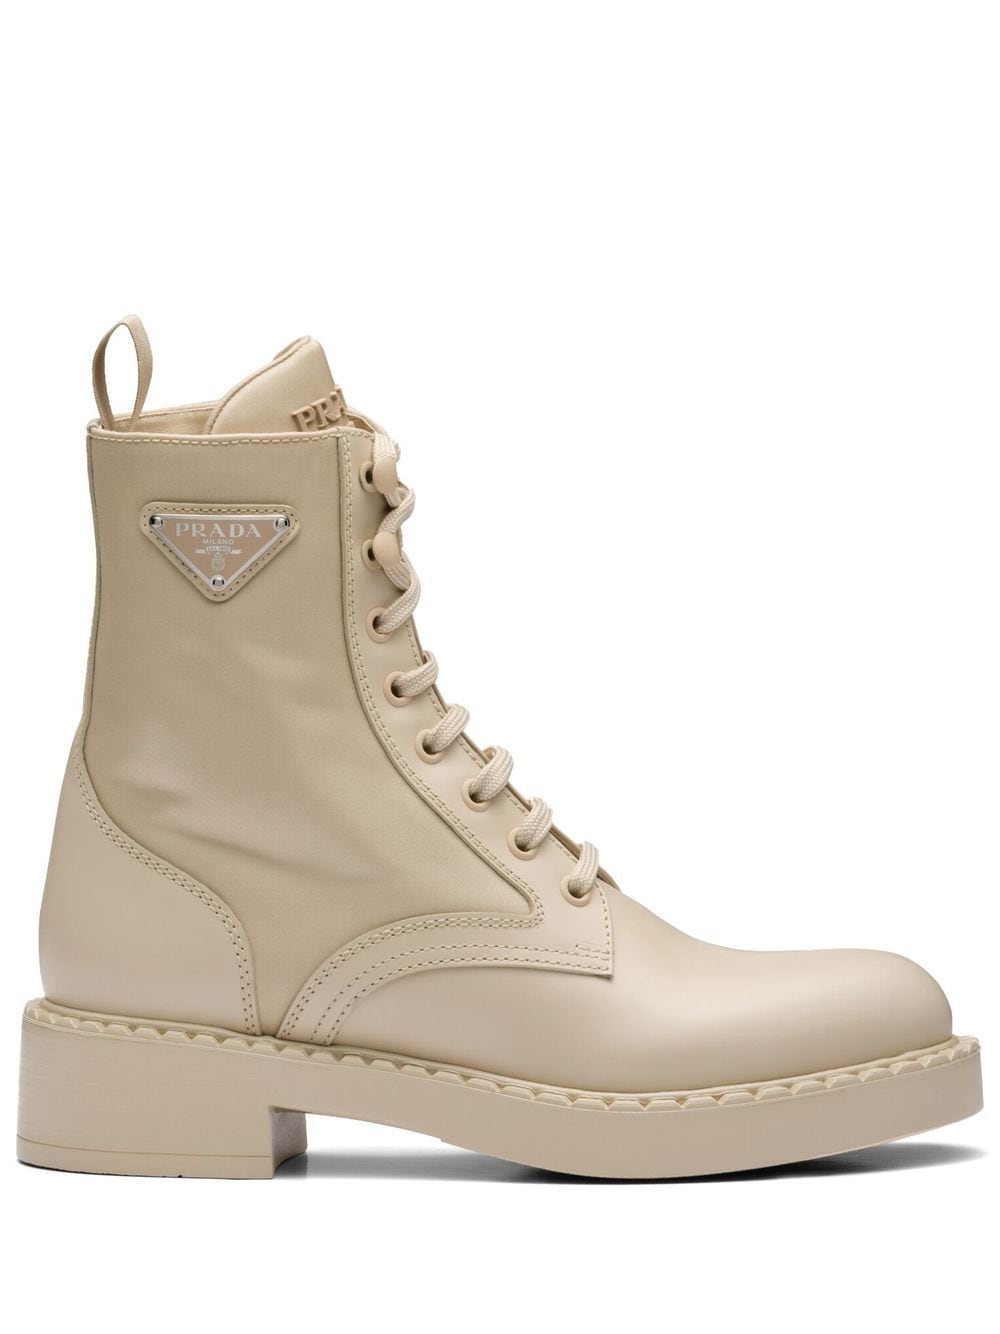 PRADA BRUSHED LEATHER LACE-UP BOOTS